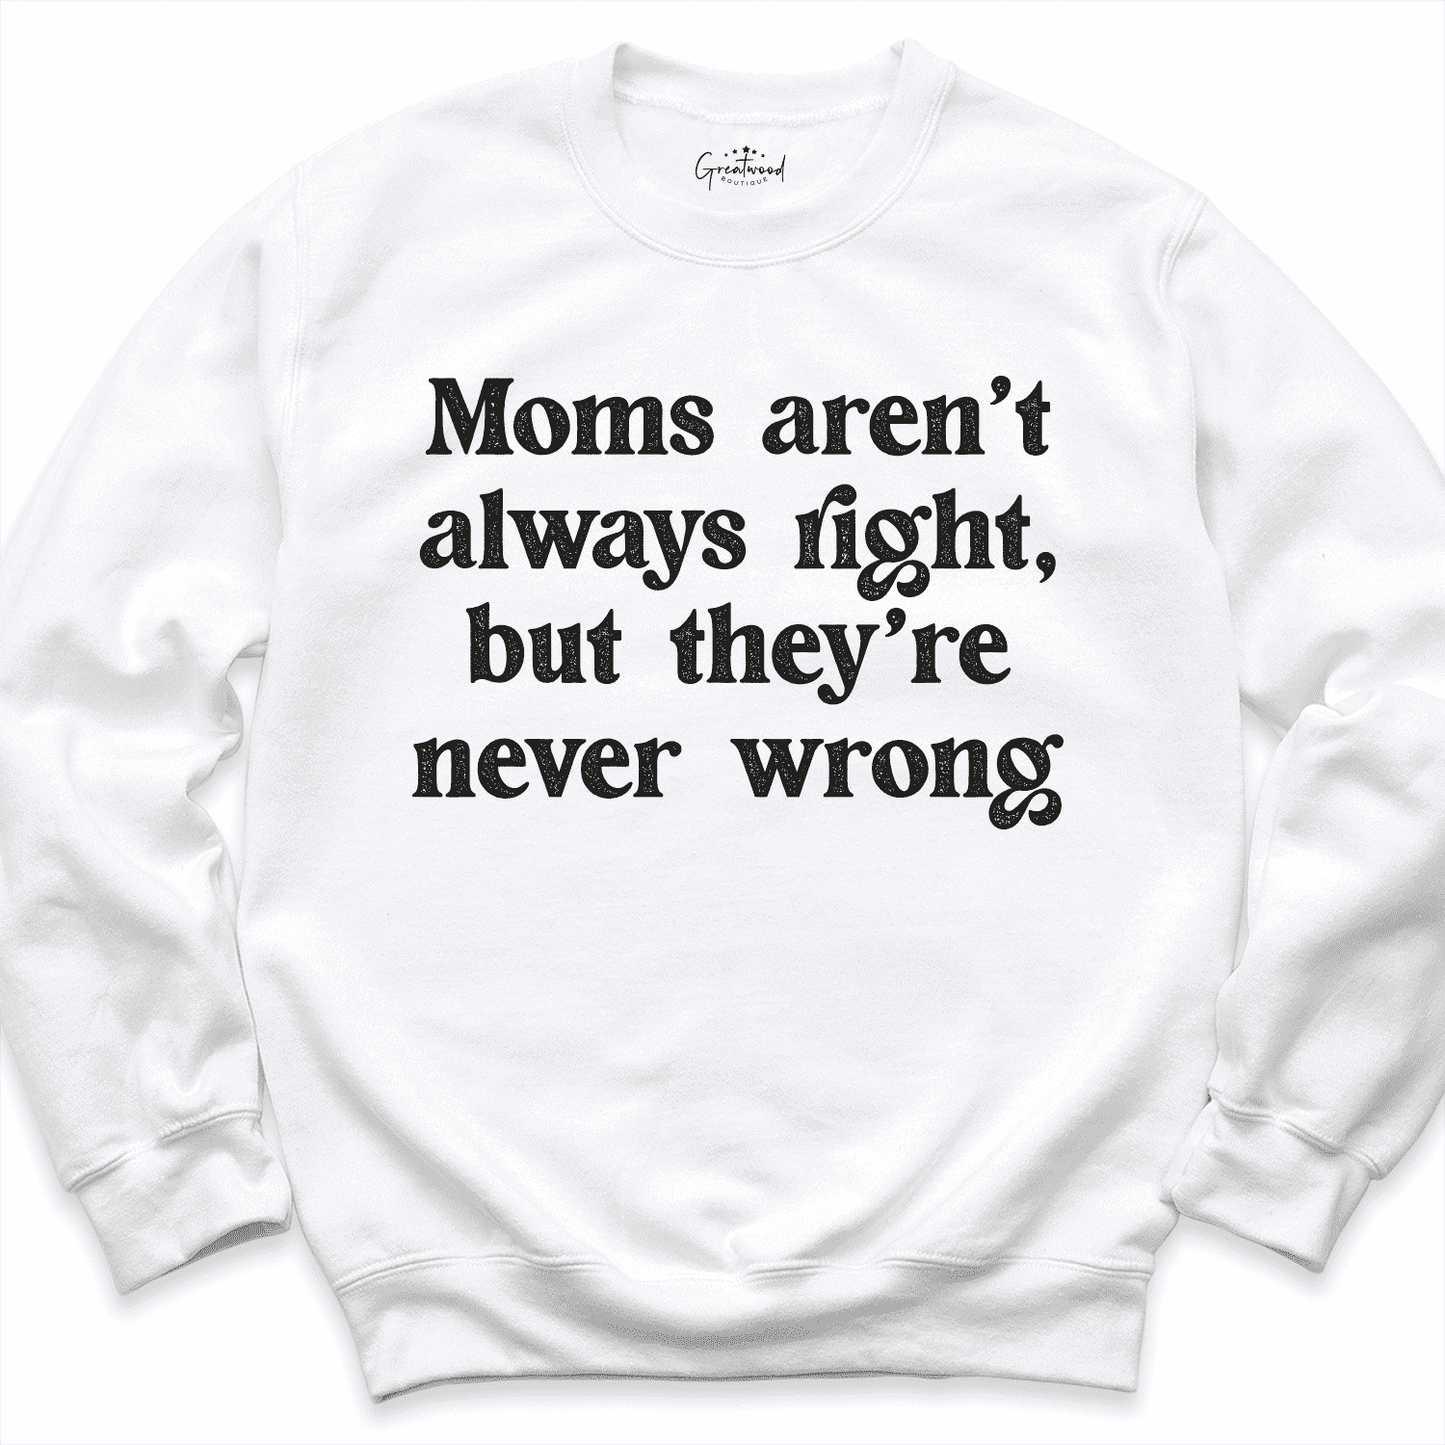 Moms Aren't Always Right But They're Never Wrong Sweatshirt White - Greatwood Boutique